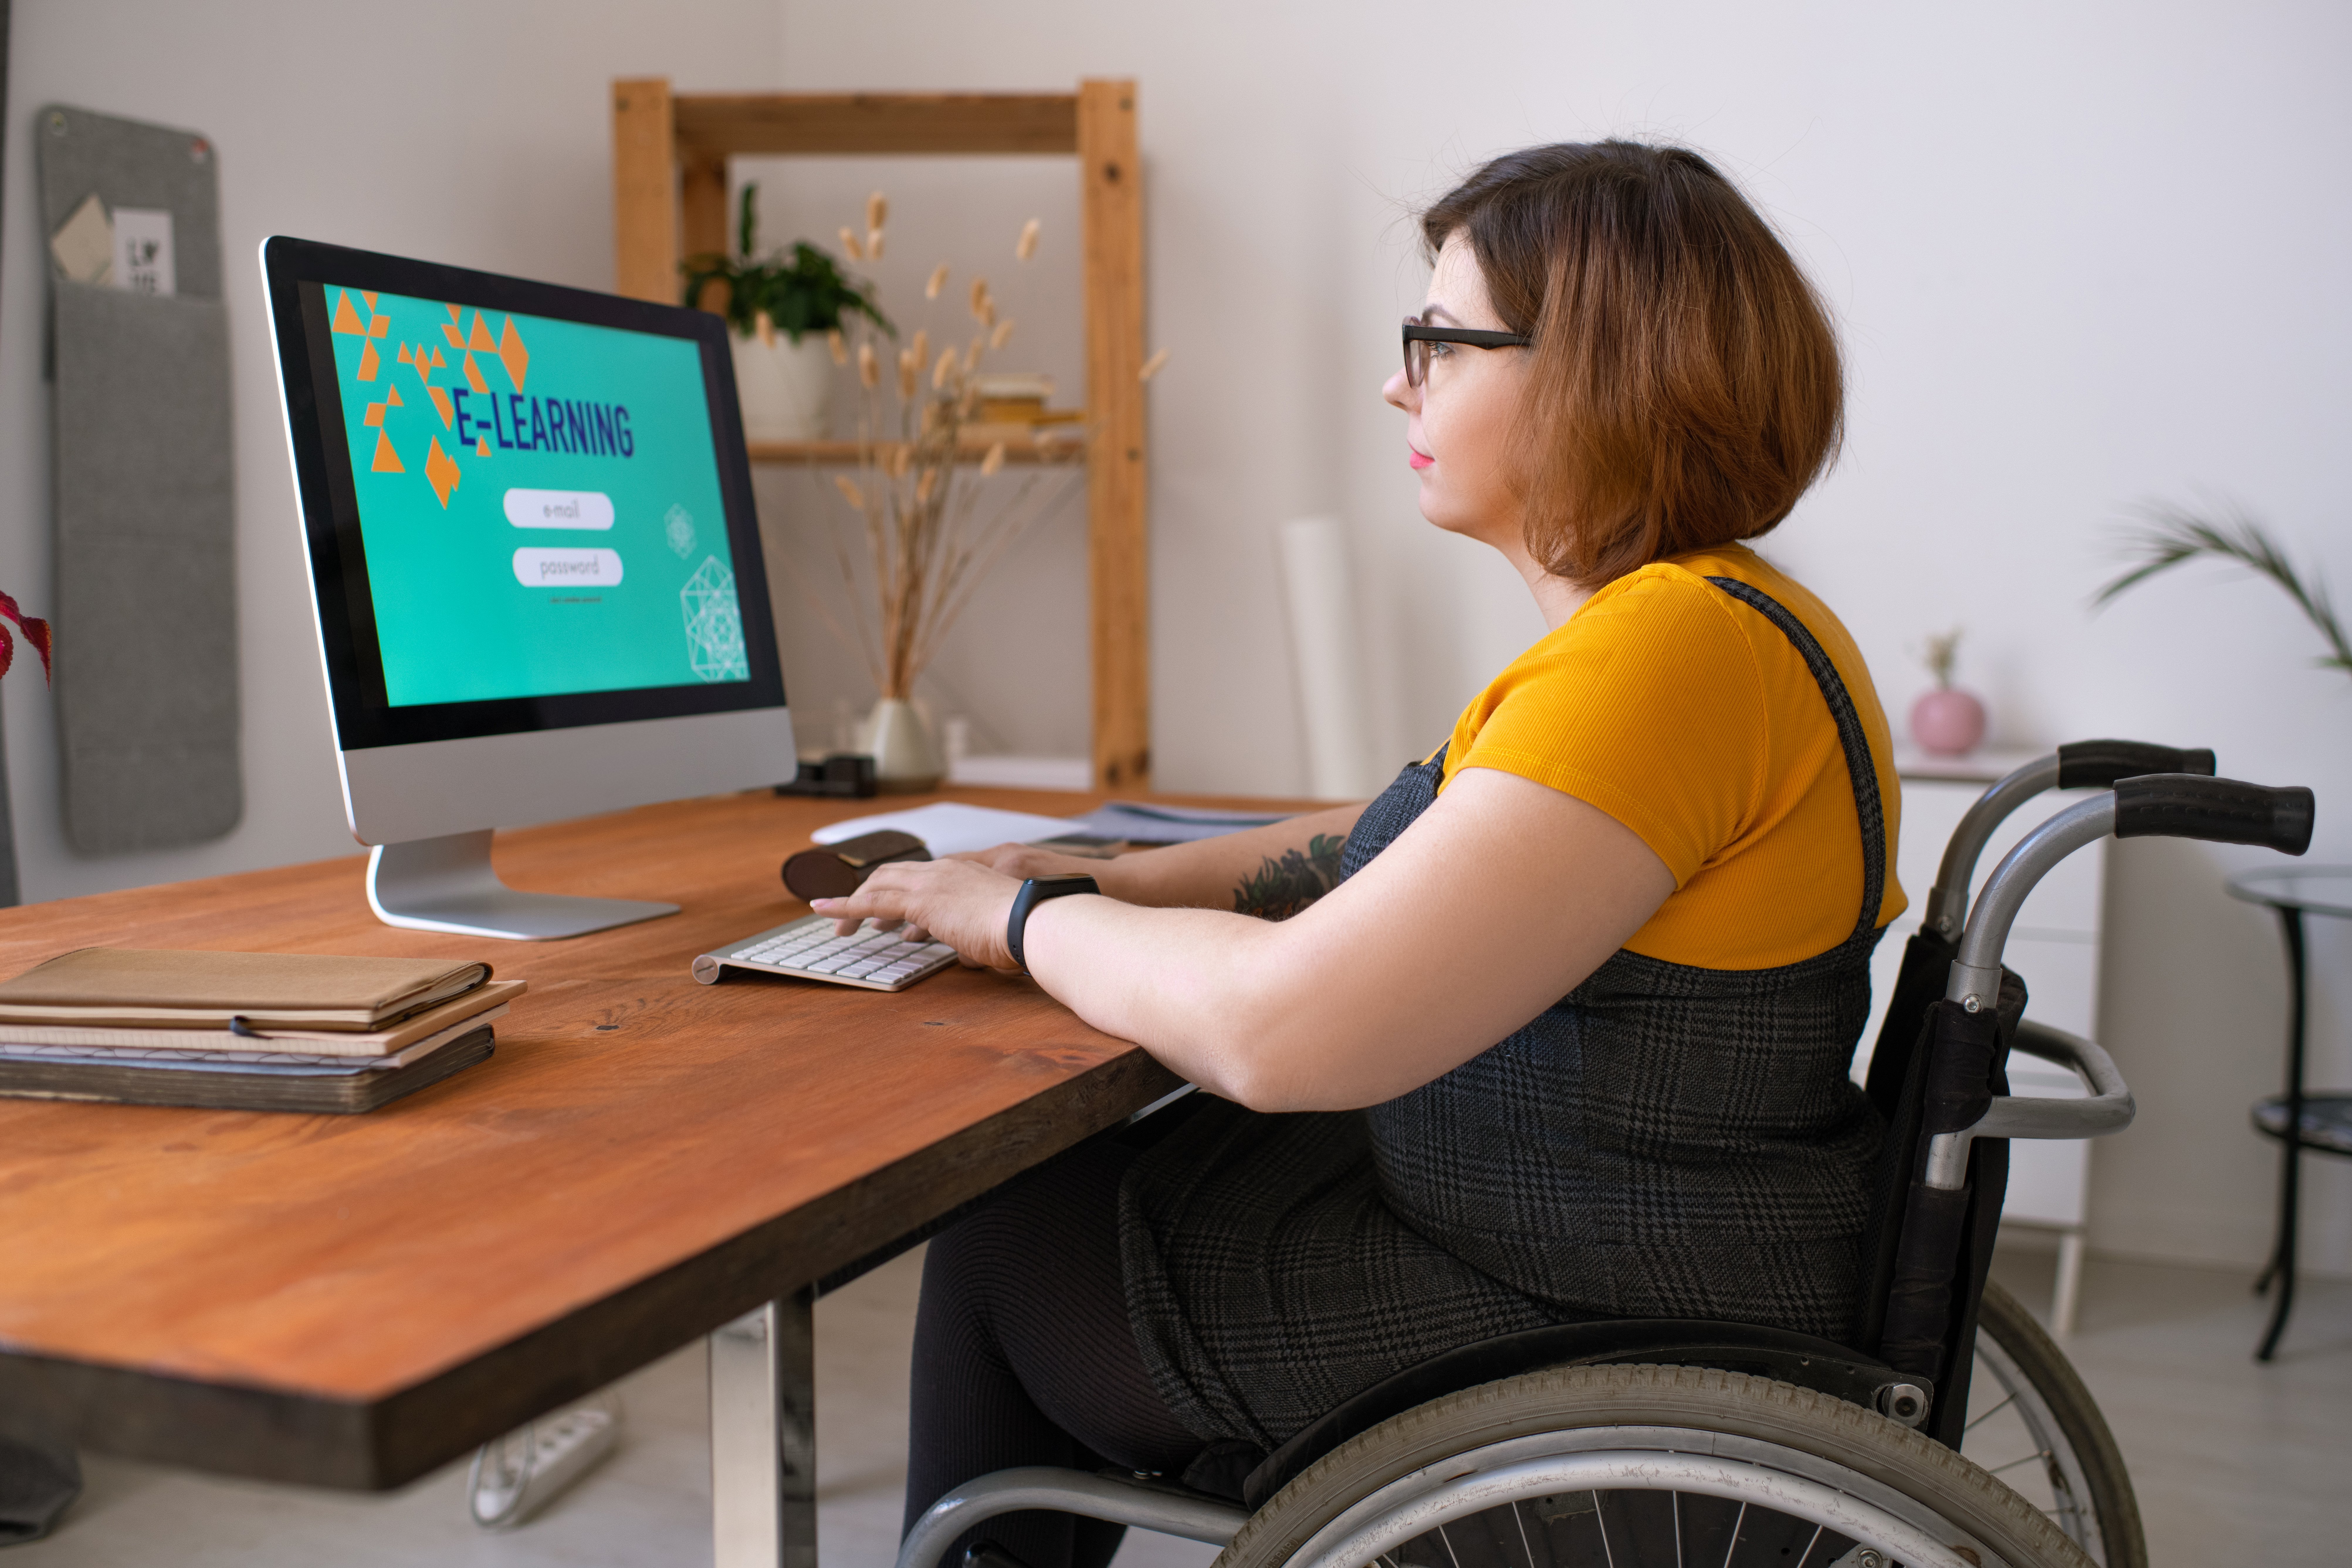 e-learning-for-disabled-people-2021-09-24-03-18-13-utc